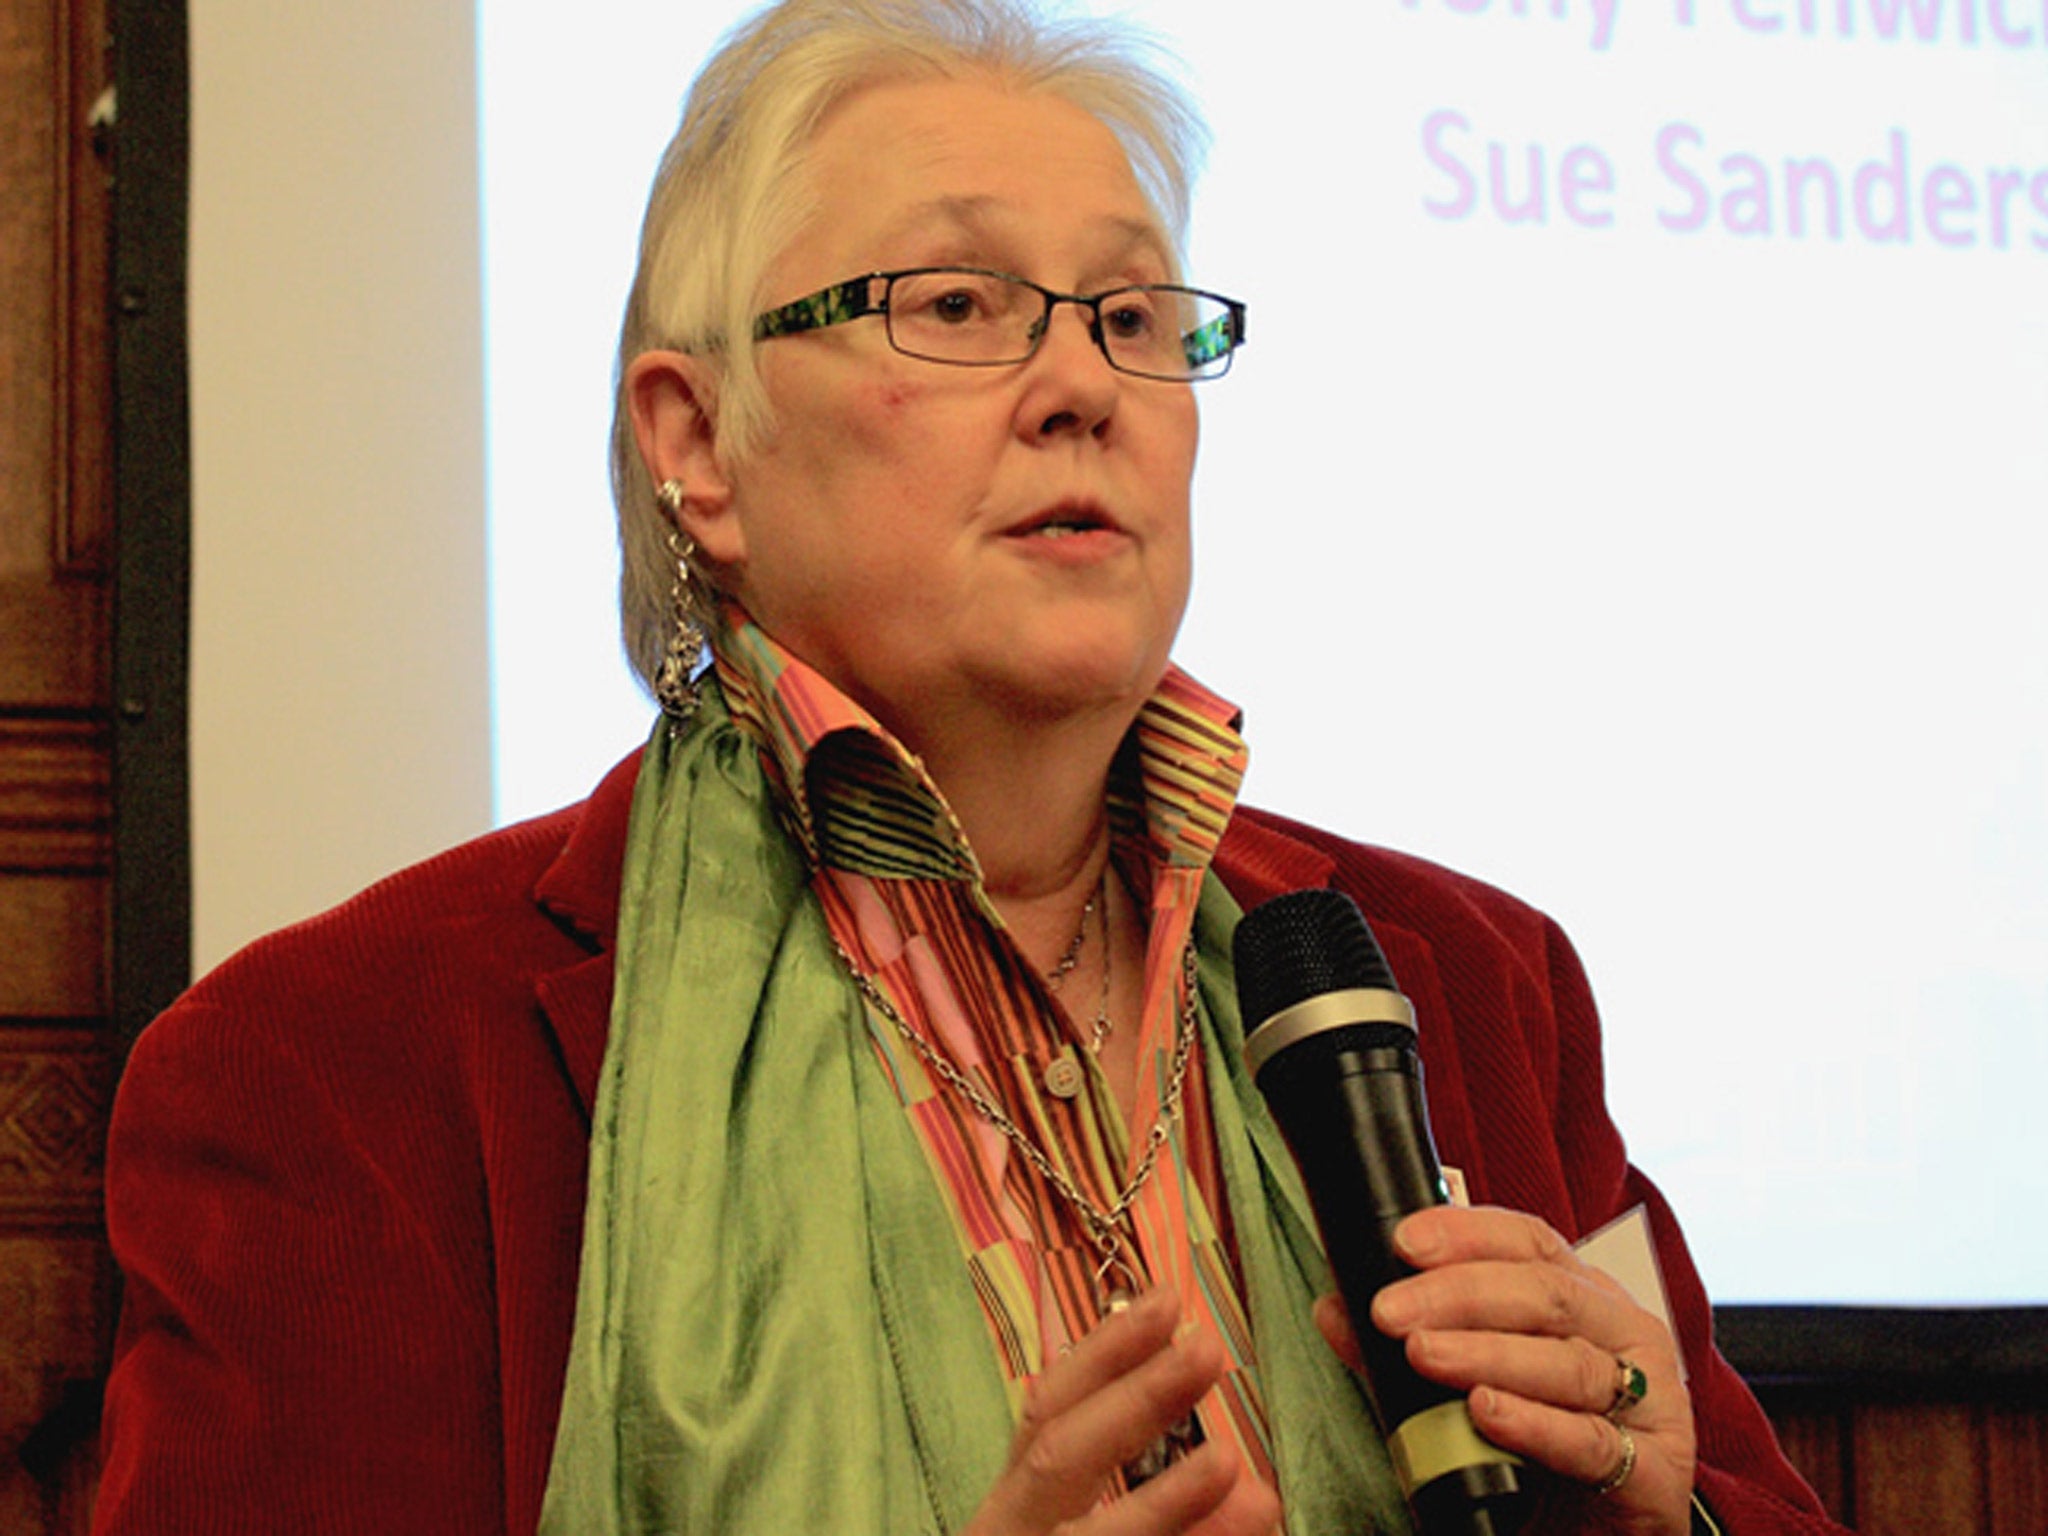 Sue Sanders, co-founder of Schools Out